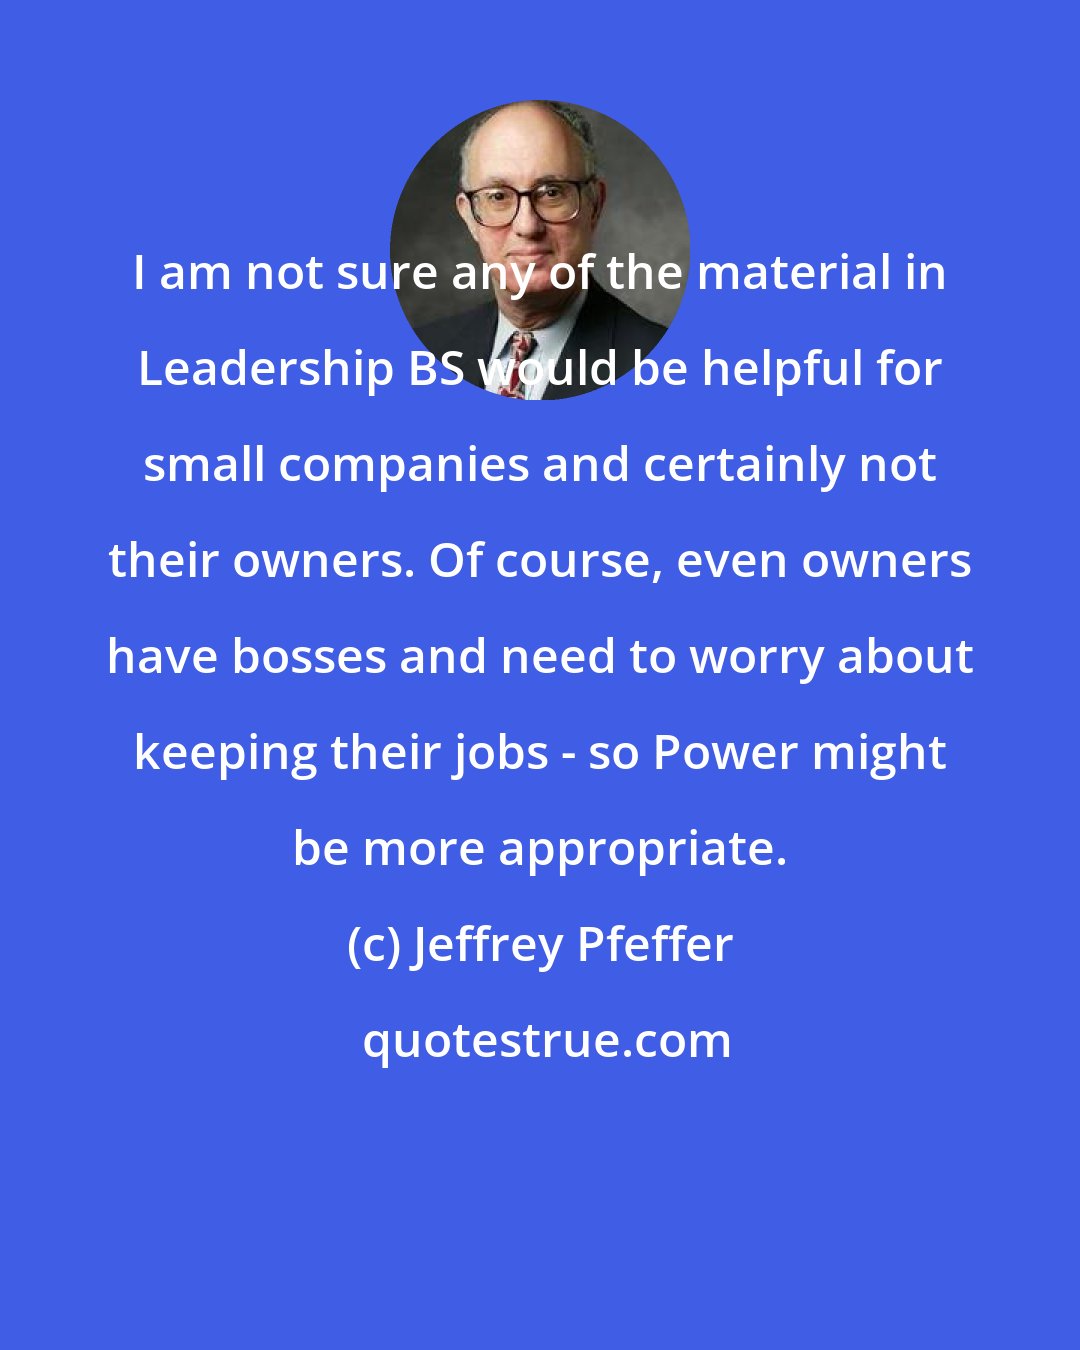 Jeffrey Pfeffer: I am not sure any of the material in Leadership BS would be helpful for small companies and certainly not their owners. Of course, even owners have bosses and need to worry about keeping their jobs - so Power might be more appropriate.